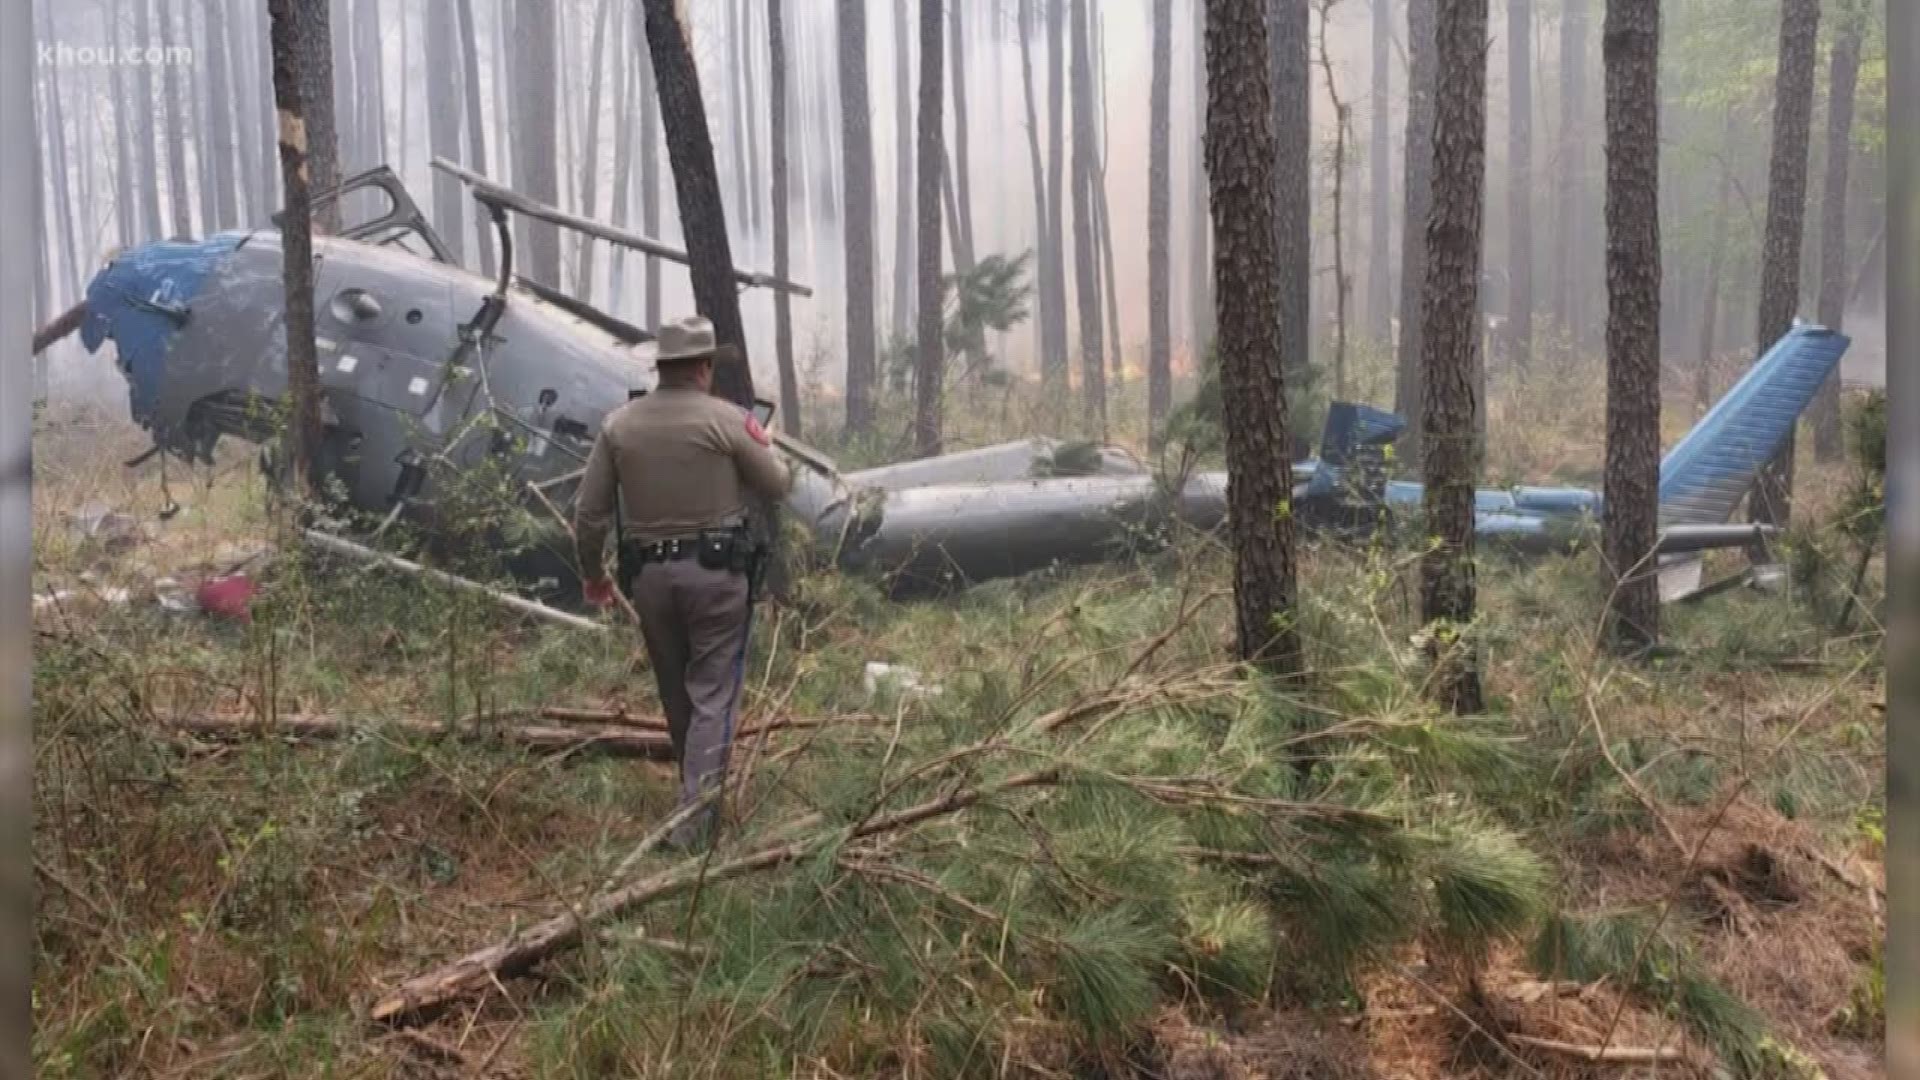 A United States Forest Service firefighter was killed Wednesday afternoon after a helicopter crashed in Montgomery County, according to the DPS.